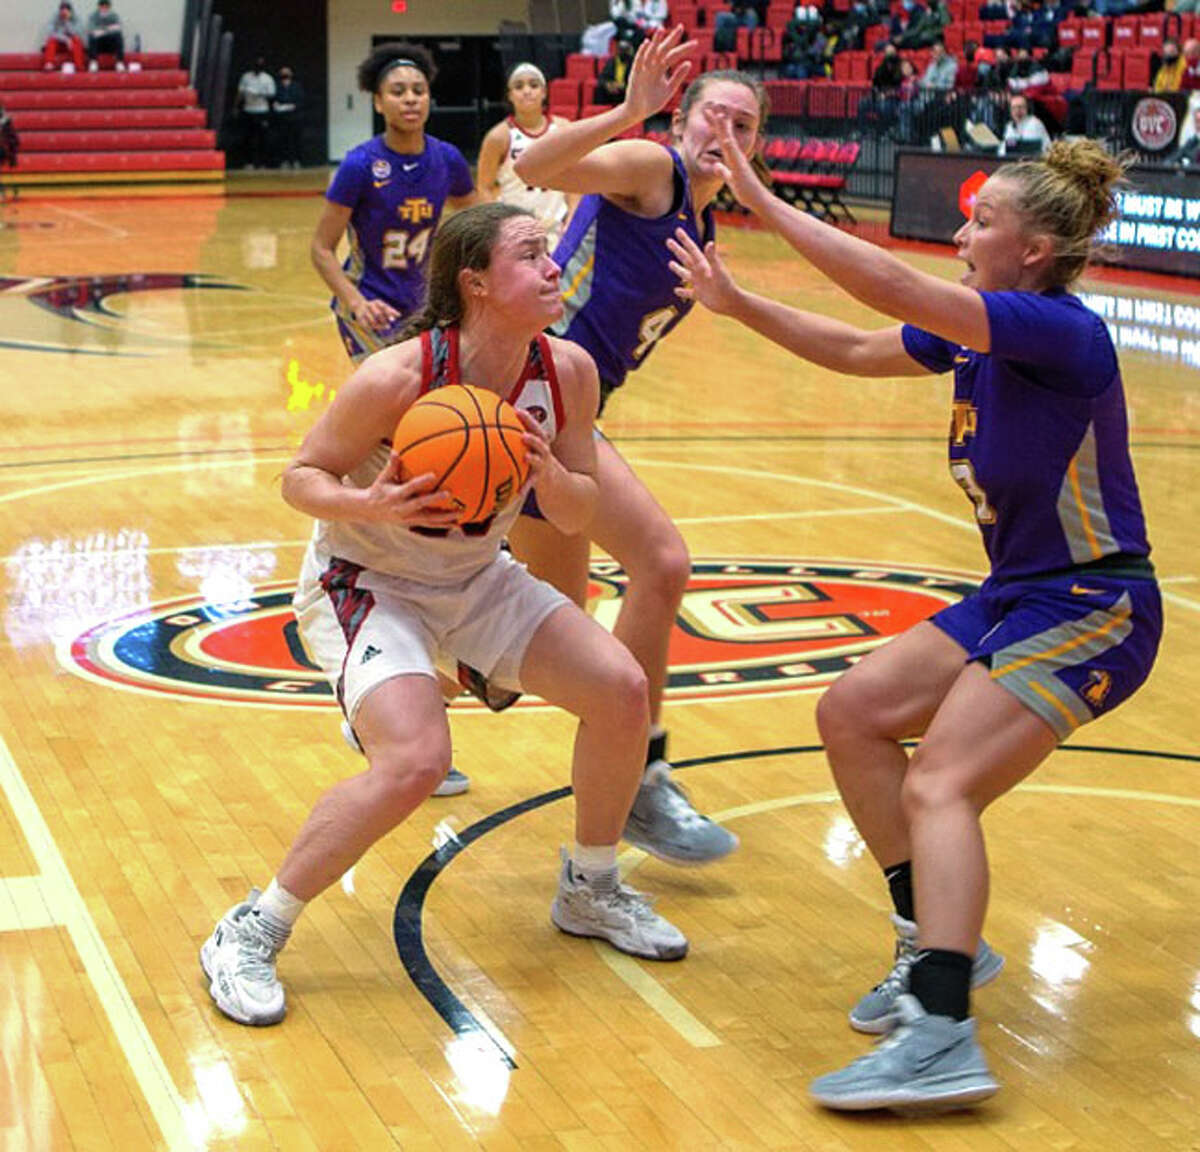 SIUE's Allie Troeckler (left) takes the ball to the basket against Tennessee Tech on Saturday at First Community Arena in Edwardsville.